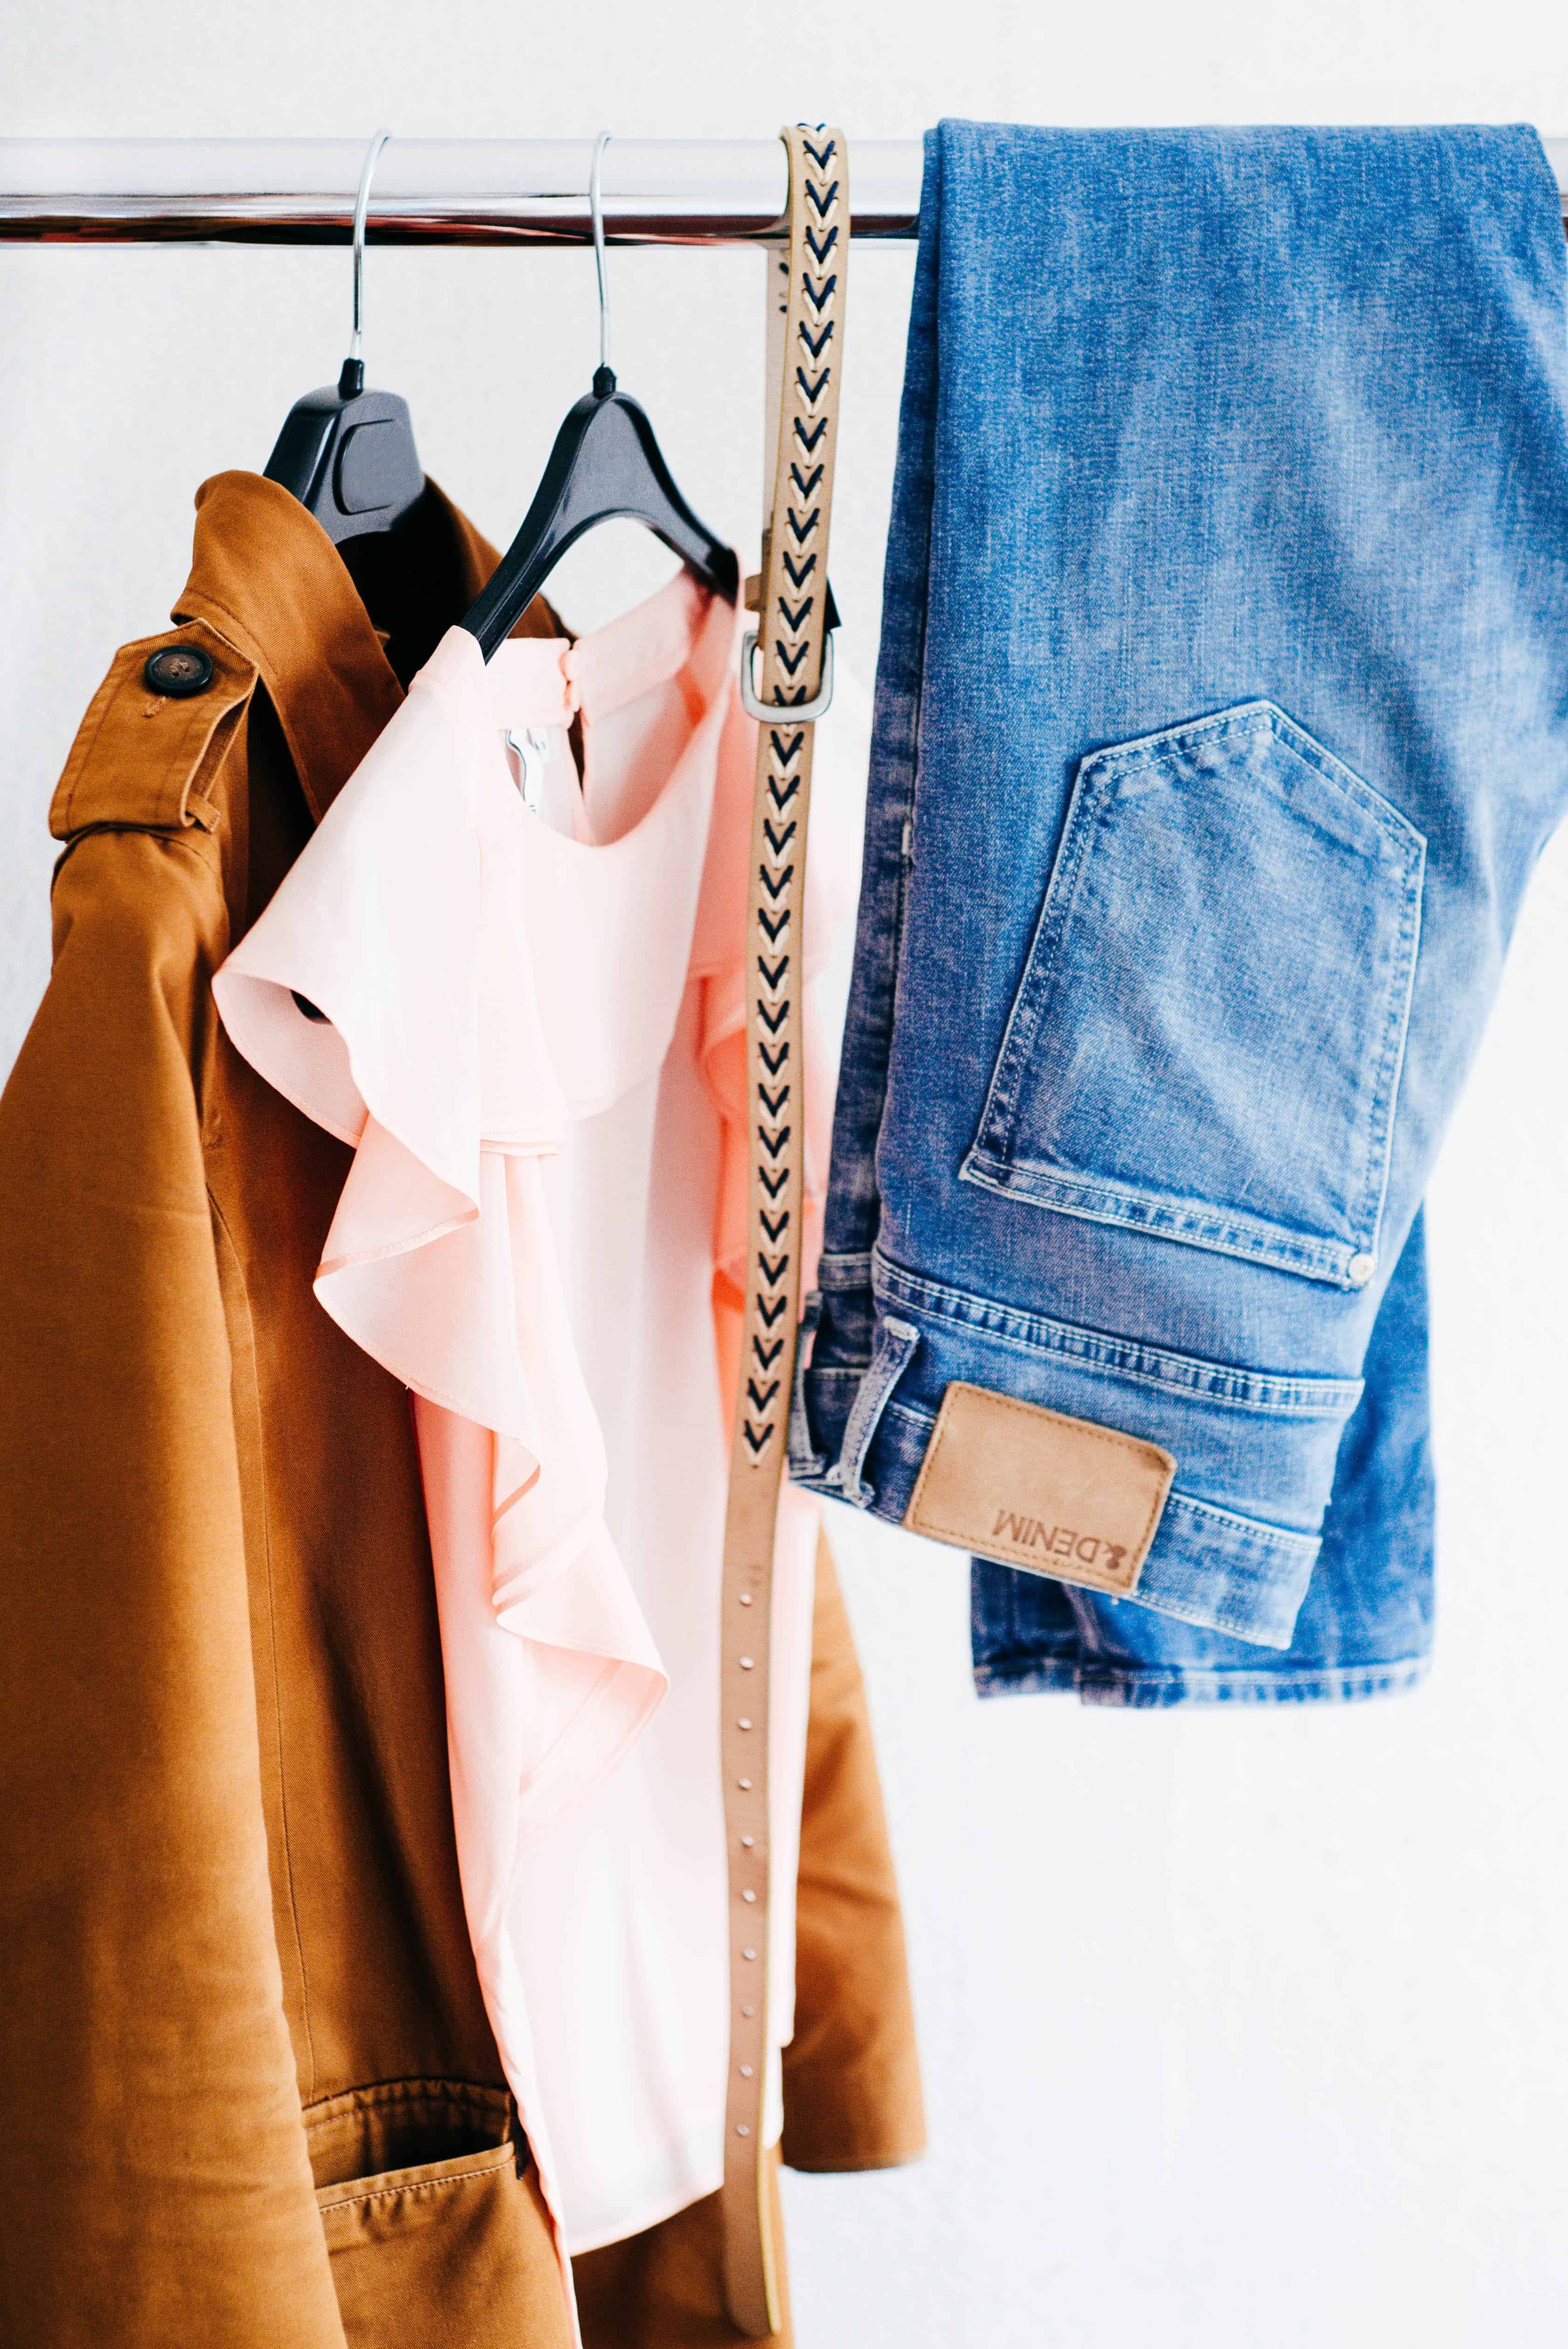 declutter your home clothes